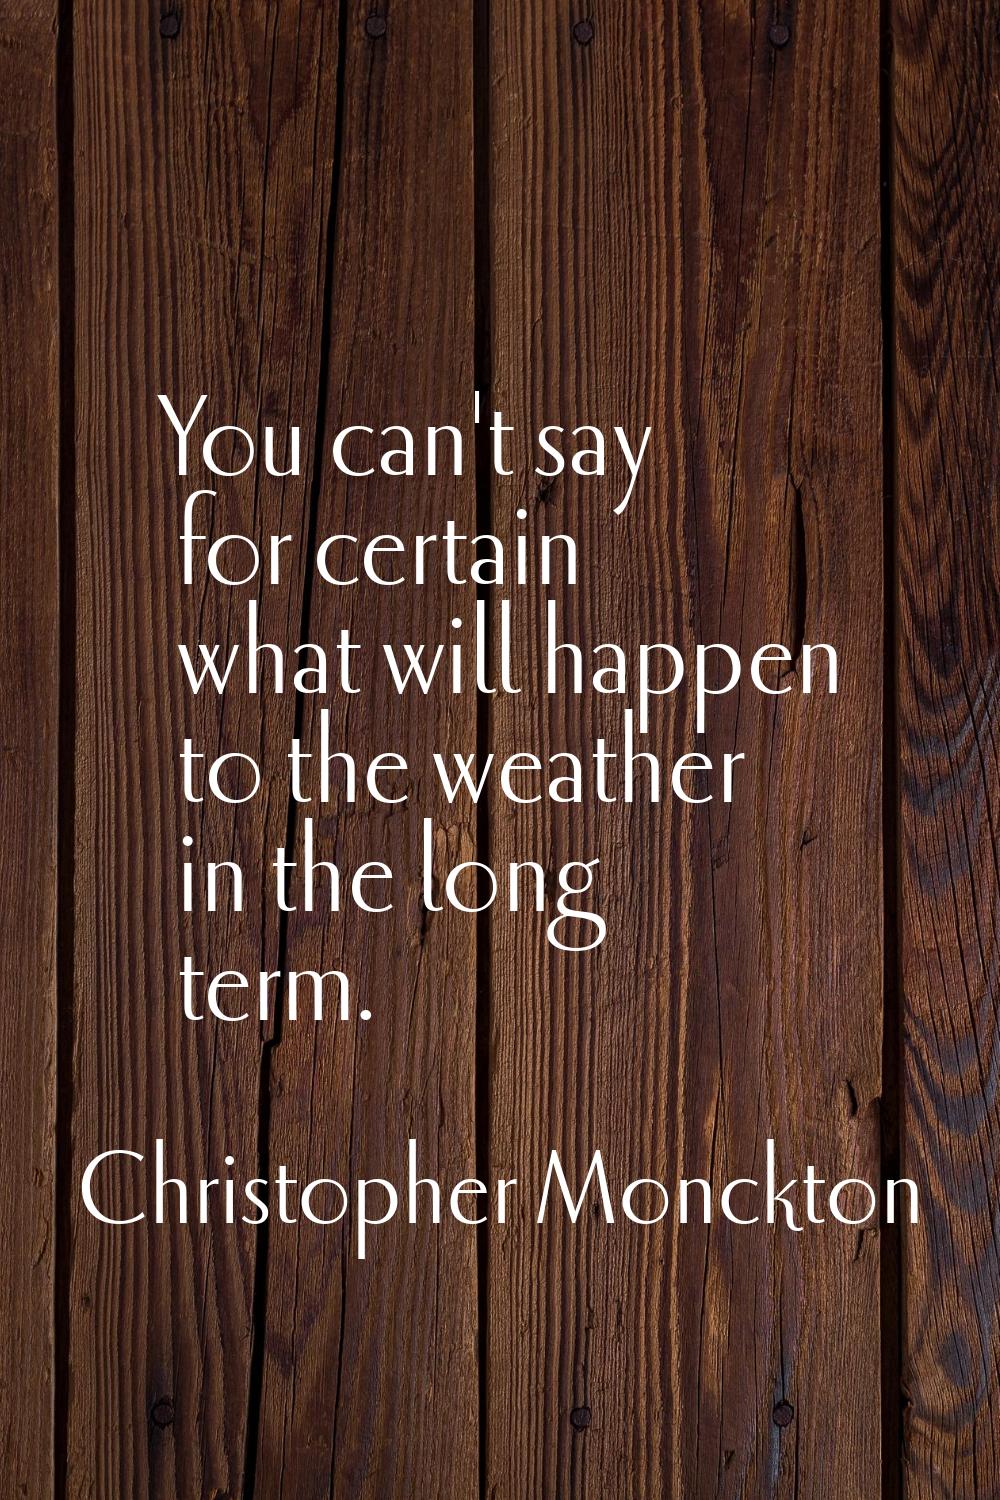 You can't say for certain what will happen to the weather in the long term.